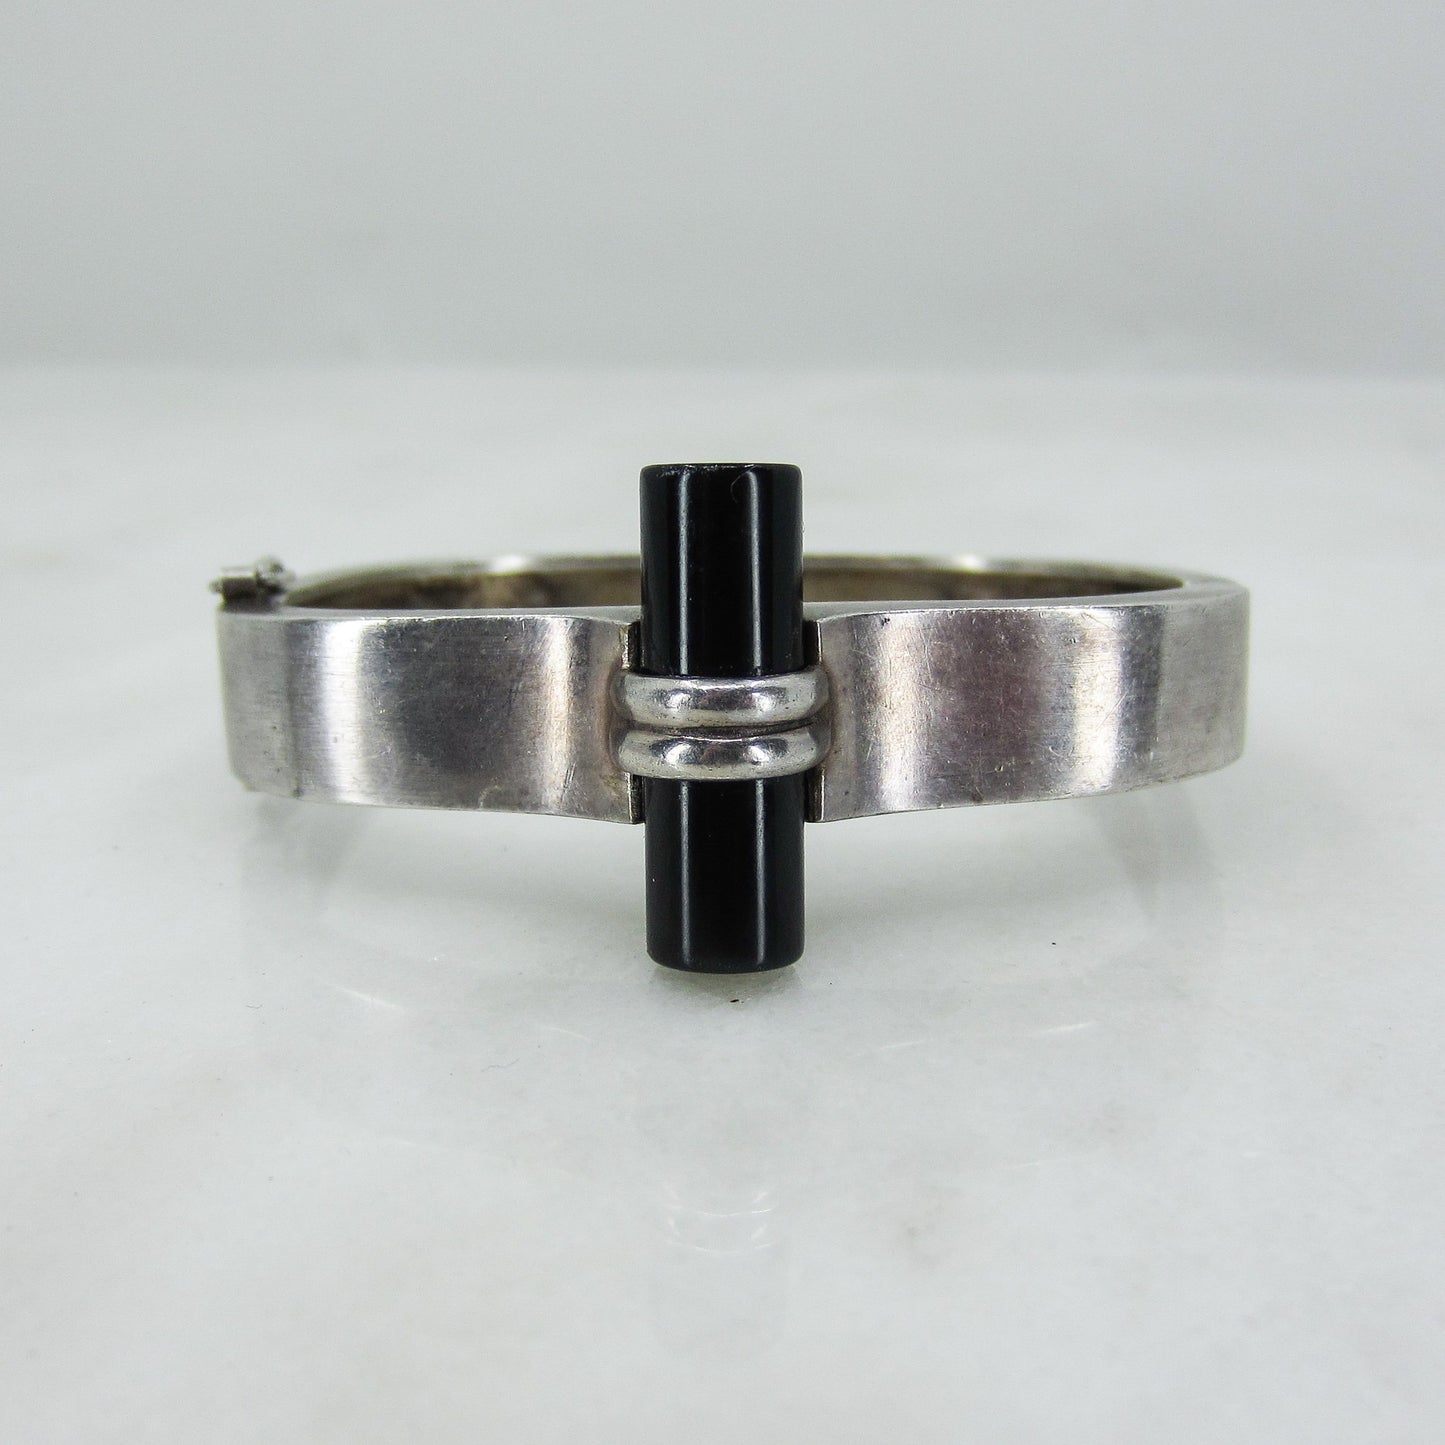 SOLD--Art Deco Onyx Hinged Bangle Sterling Silver c. 1940